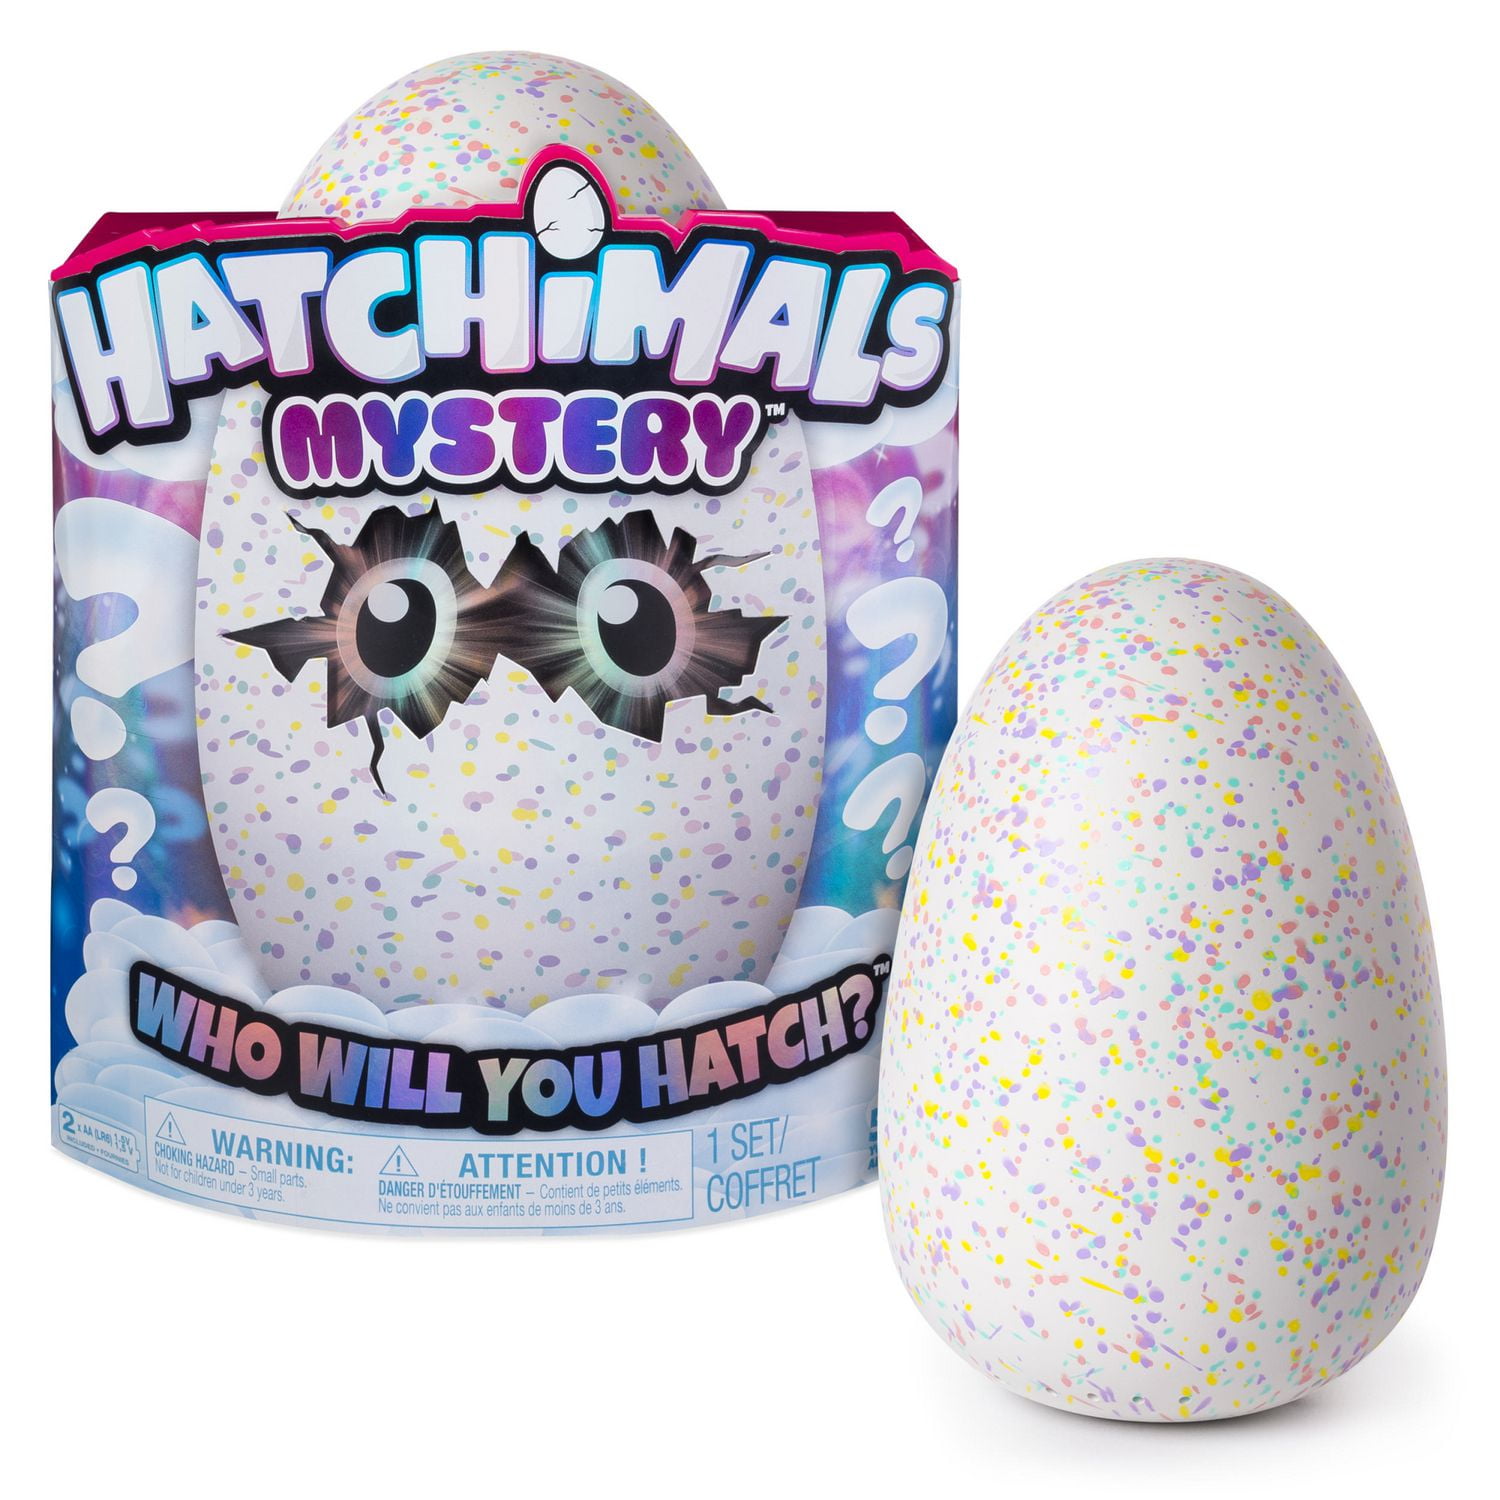 Hatchimals Mystery - Hatch 1 of 4 Fluffy Interactive Mystery